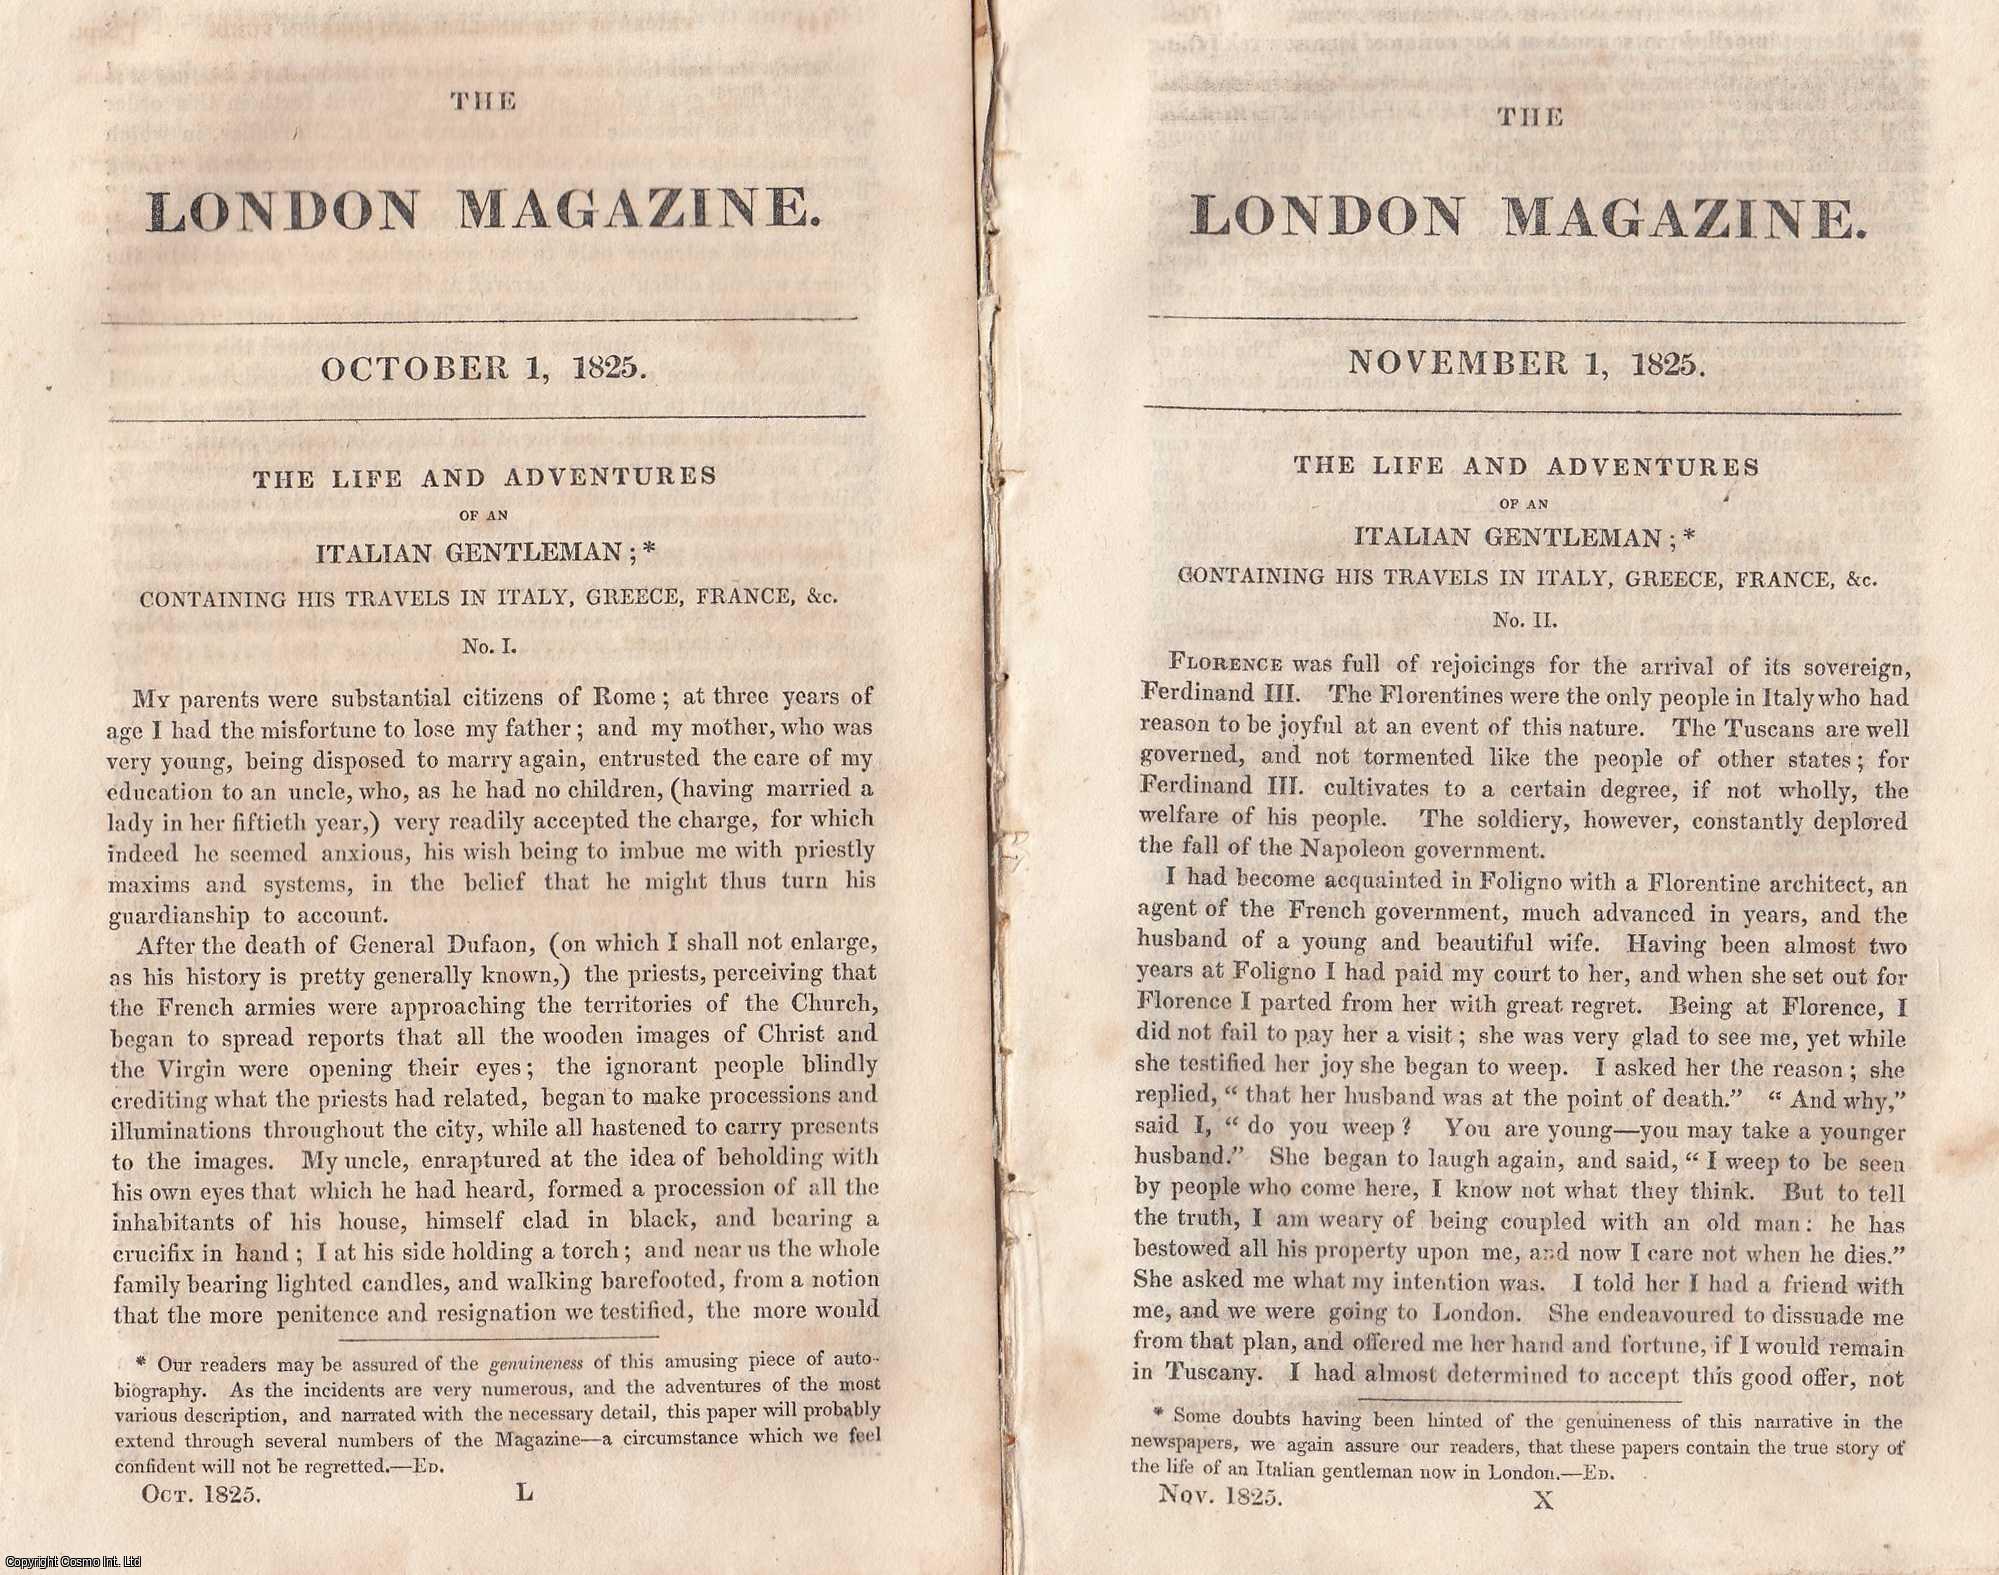 London Magazine - The Life and Adventures of an Italian Gentleman; containg his Travels in Italy, Greece, France, etc, Parts 1 & 2. An original essay from The London Magazine, 1825. No author is given for this article.